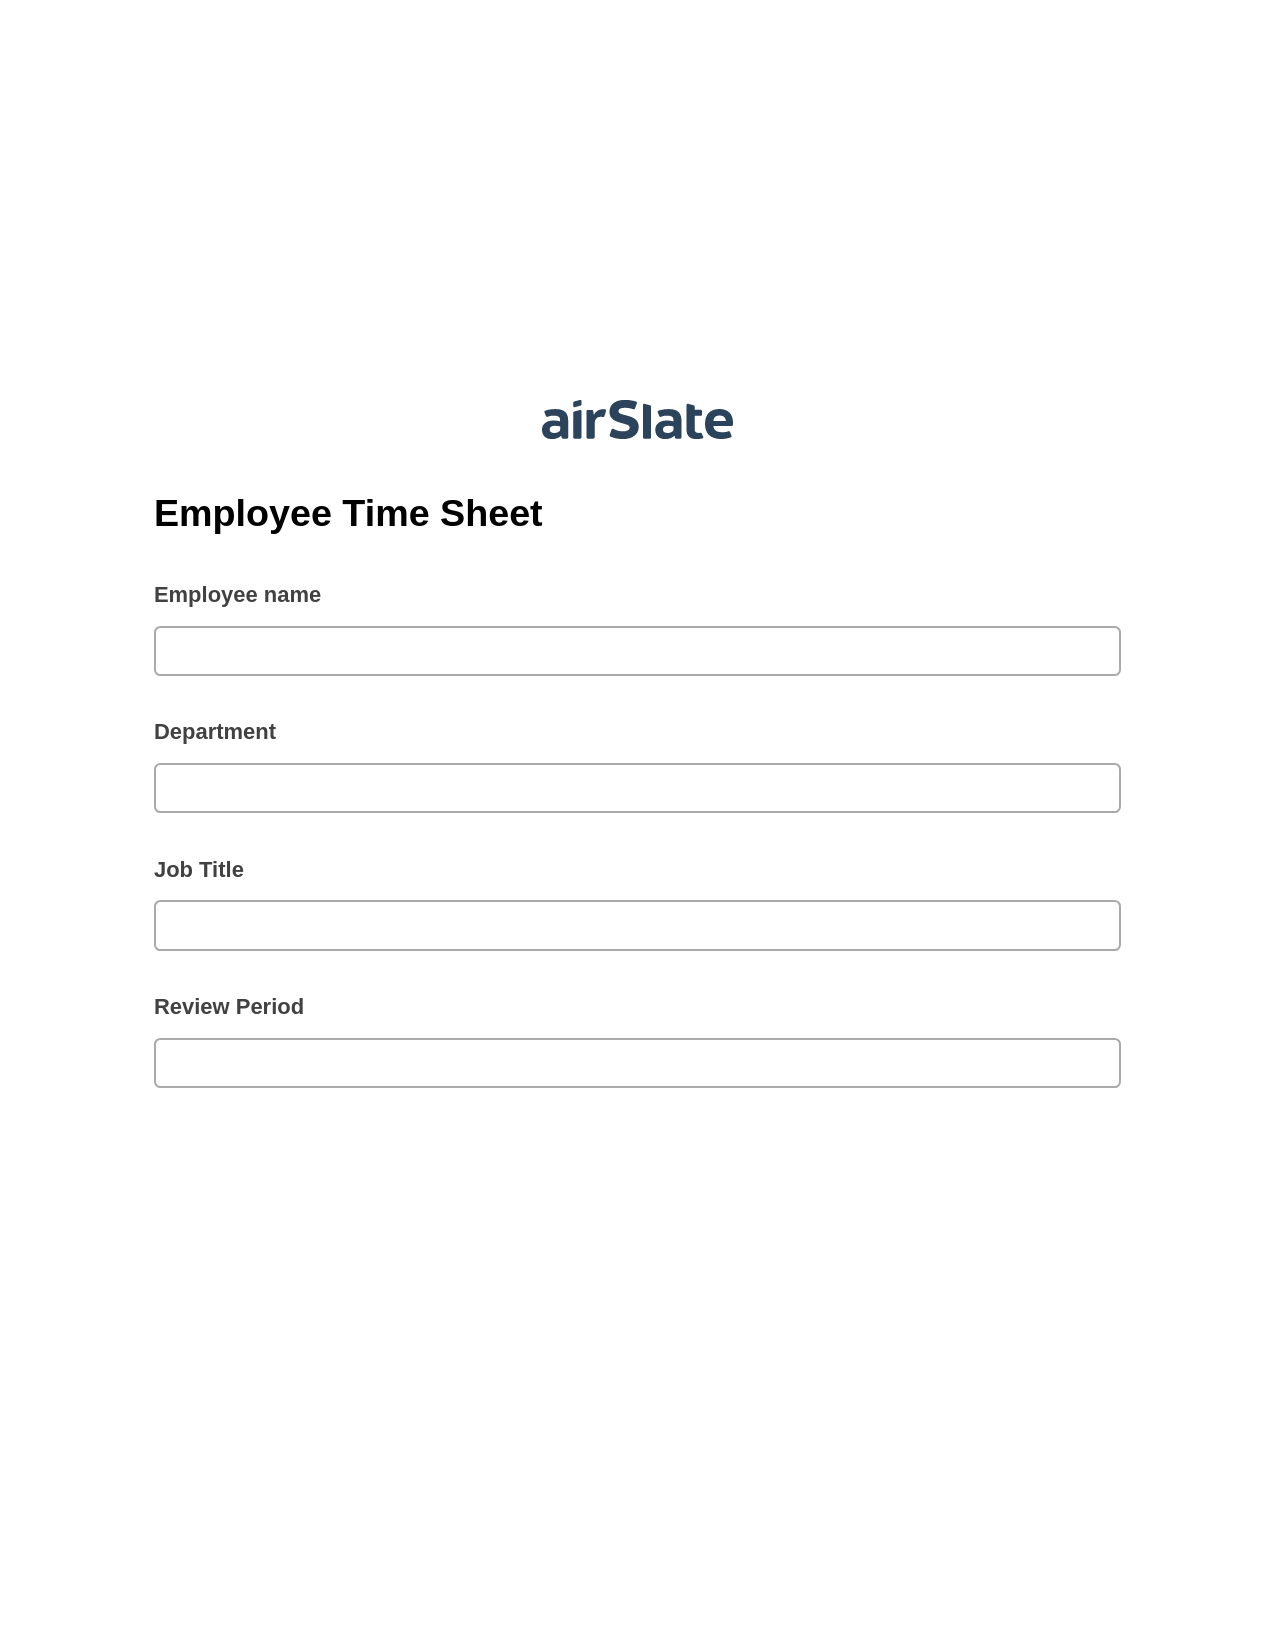 Employee Time Sheet Pre-fill Document Bot, Create slate addon, Export to Excel 365 Bot